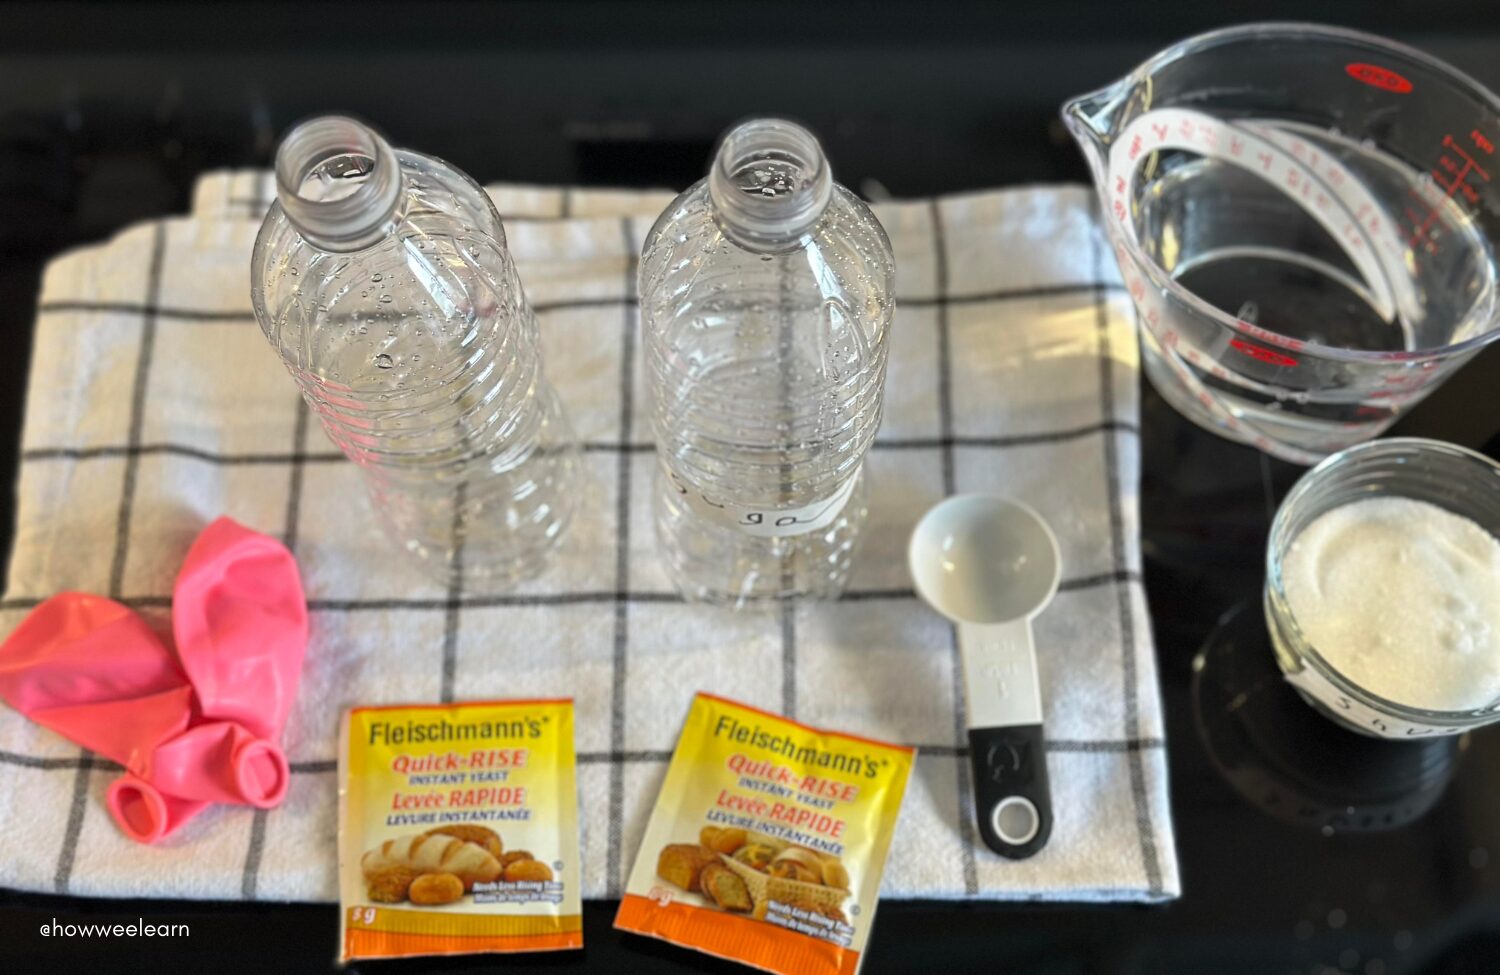 Sugar and Yeast Valentine's Day Science Experiment Materials